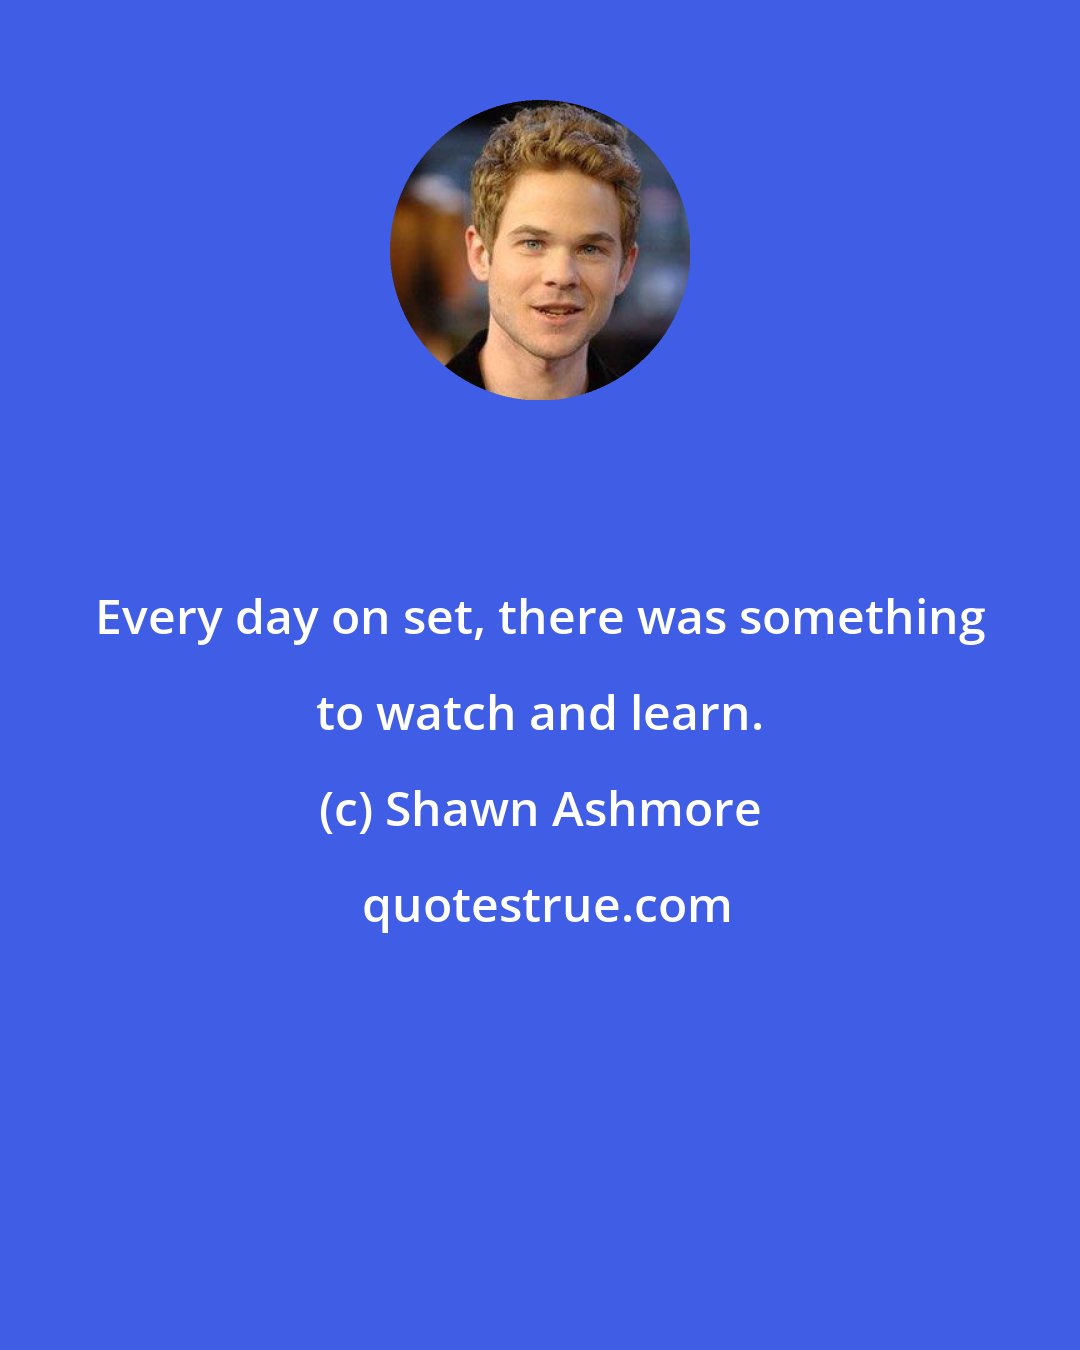 Shawn Ashmore: Every day on set, there was something to watch and learn.